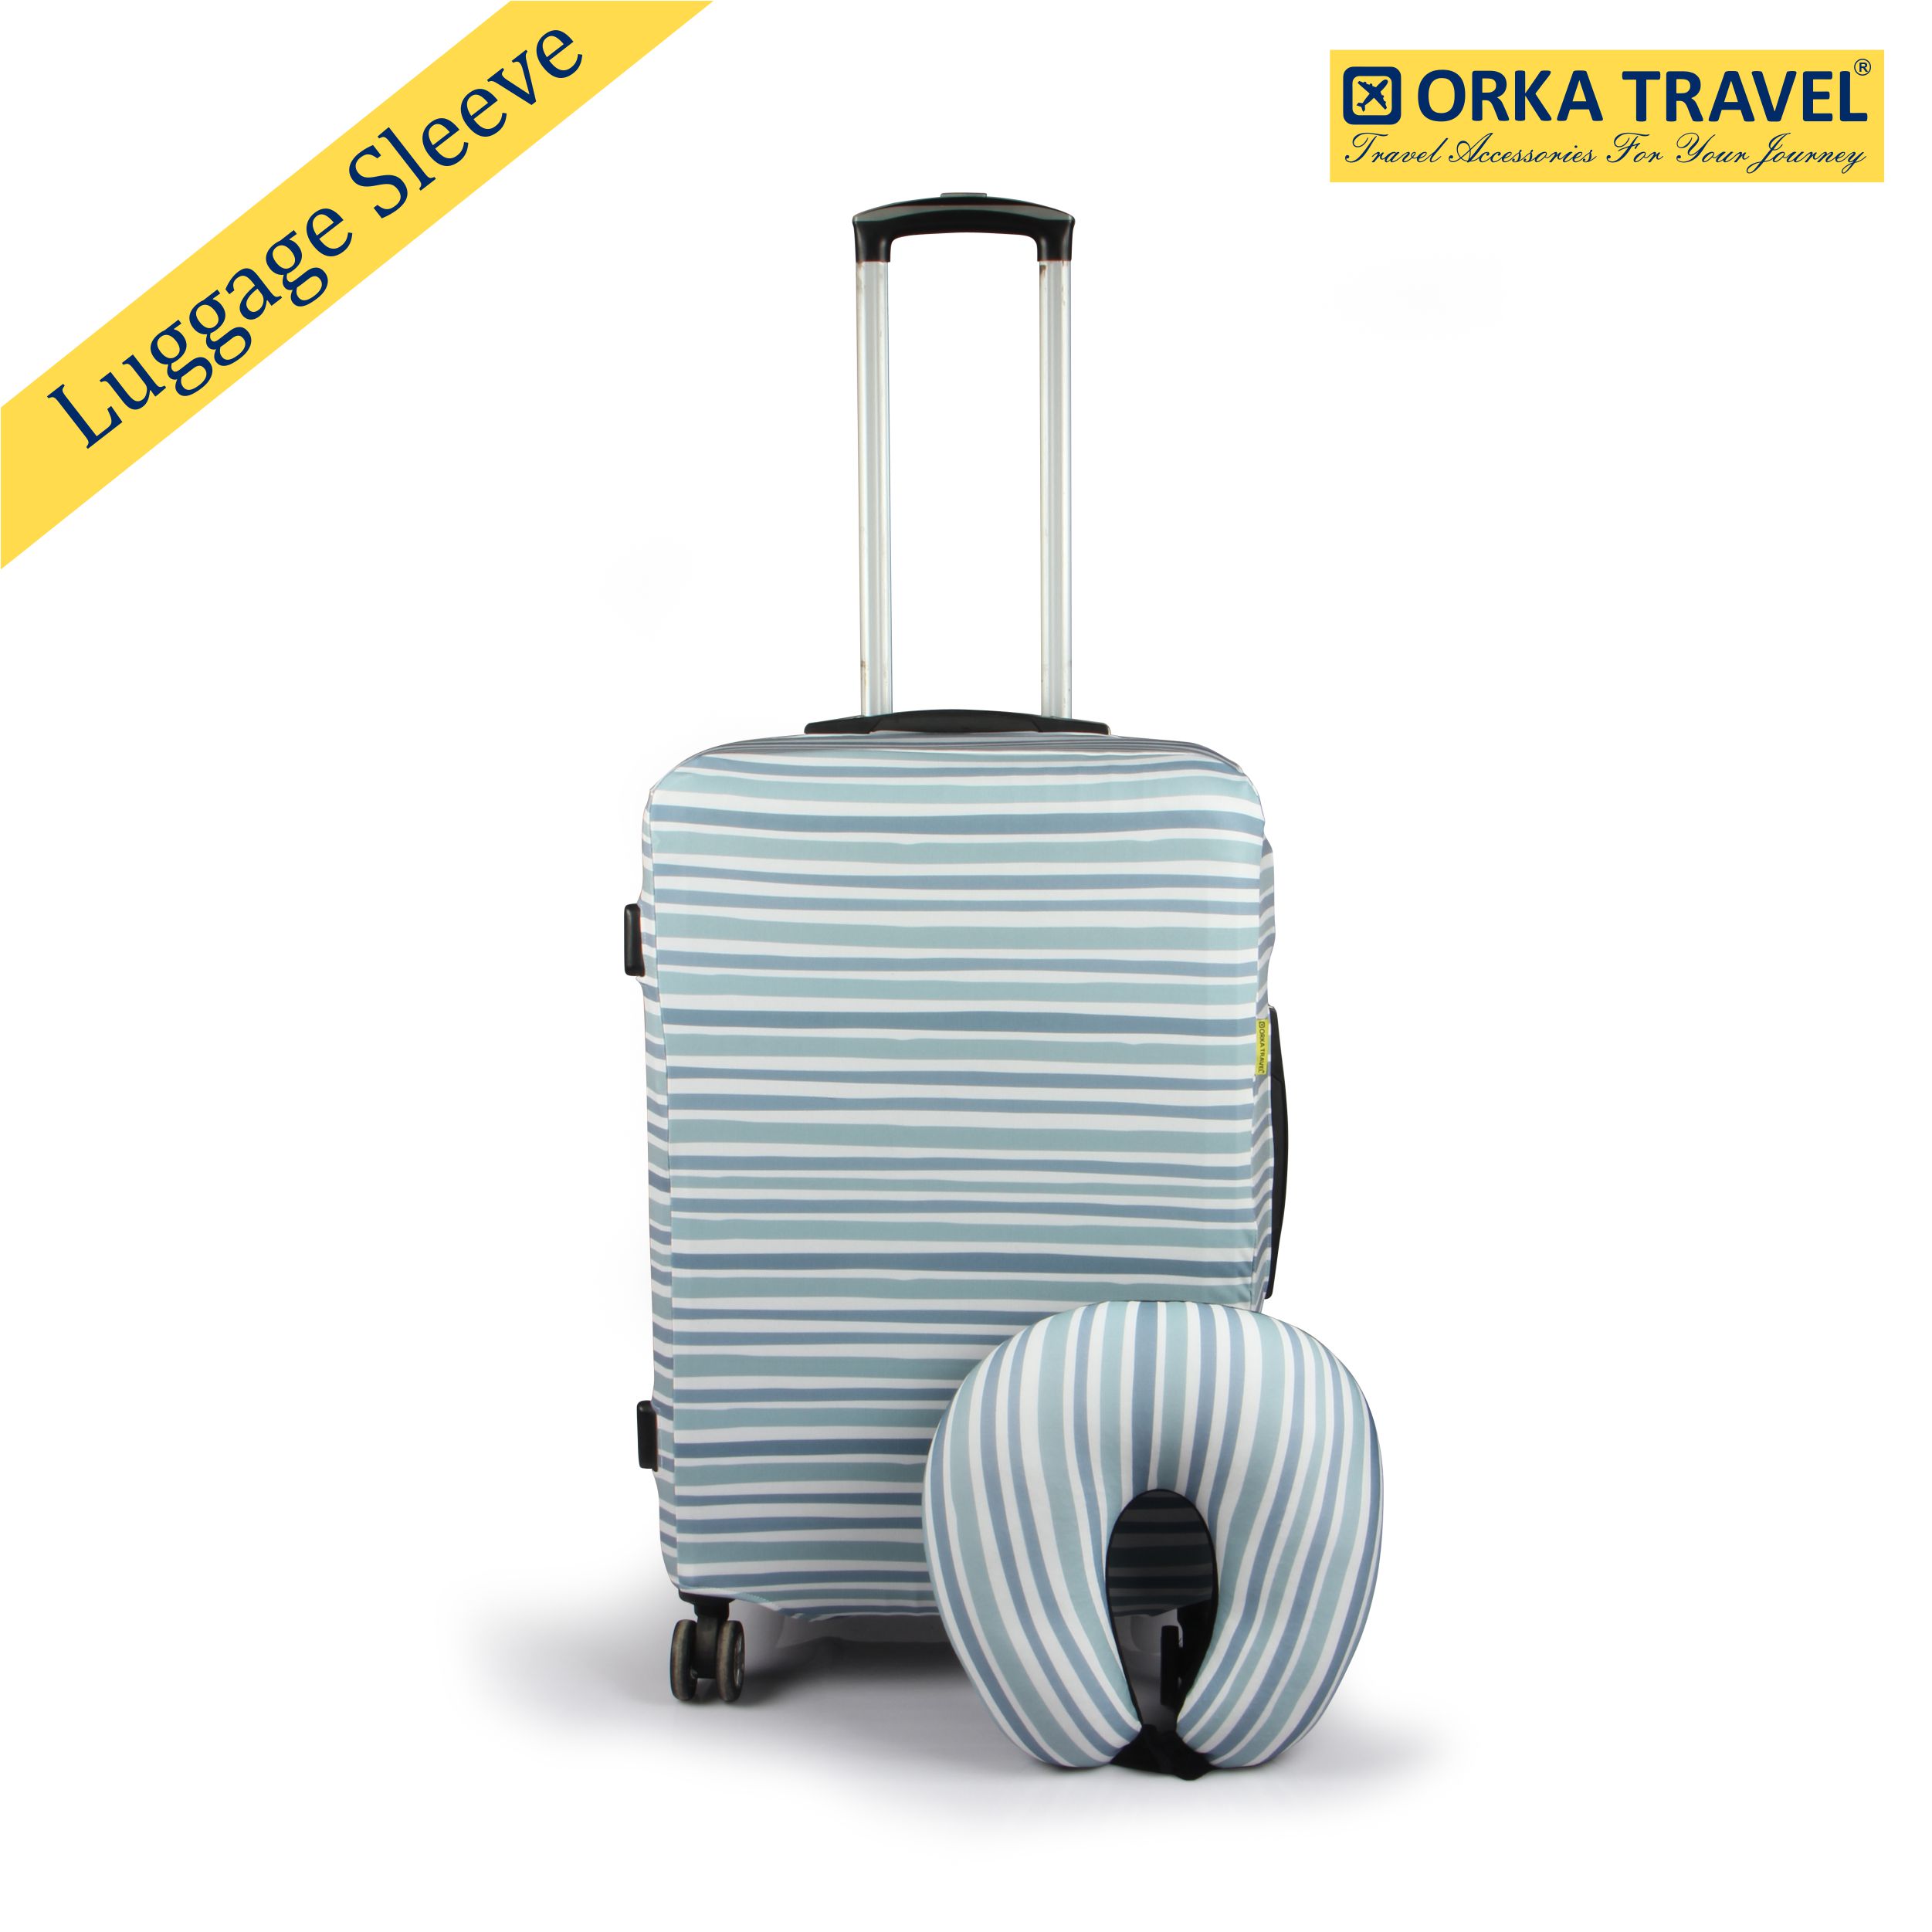 ORKA Travel Linear Theme Luggage Protector With Matching U Neck Pillow Luggage Cover  